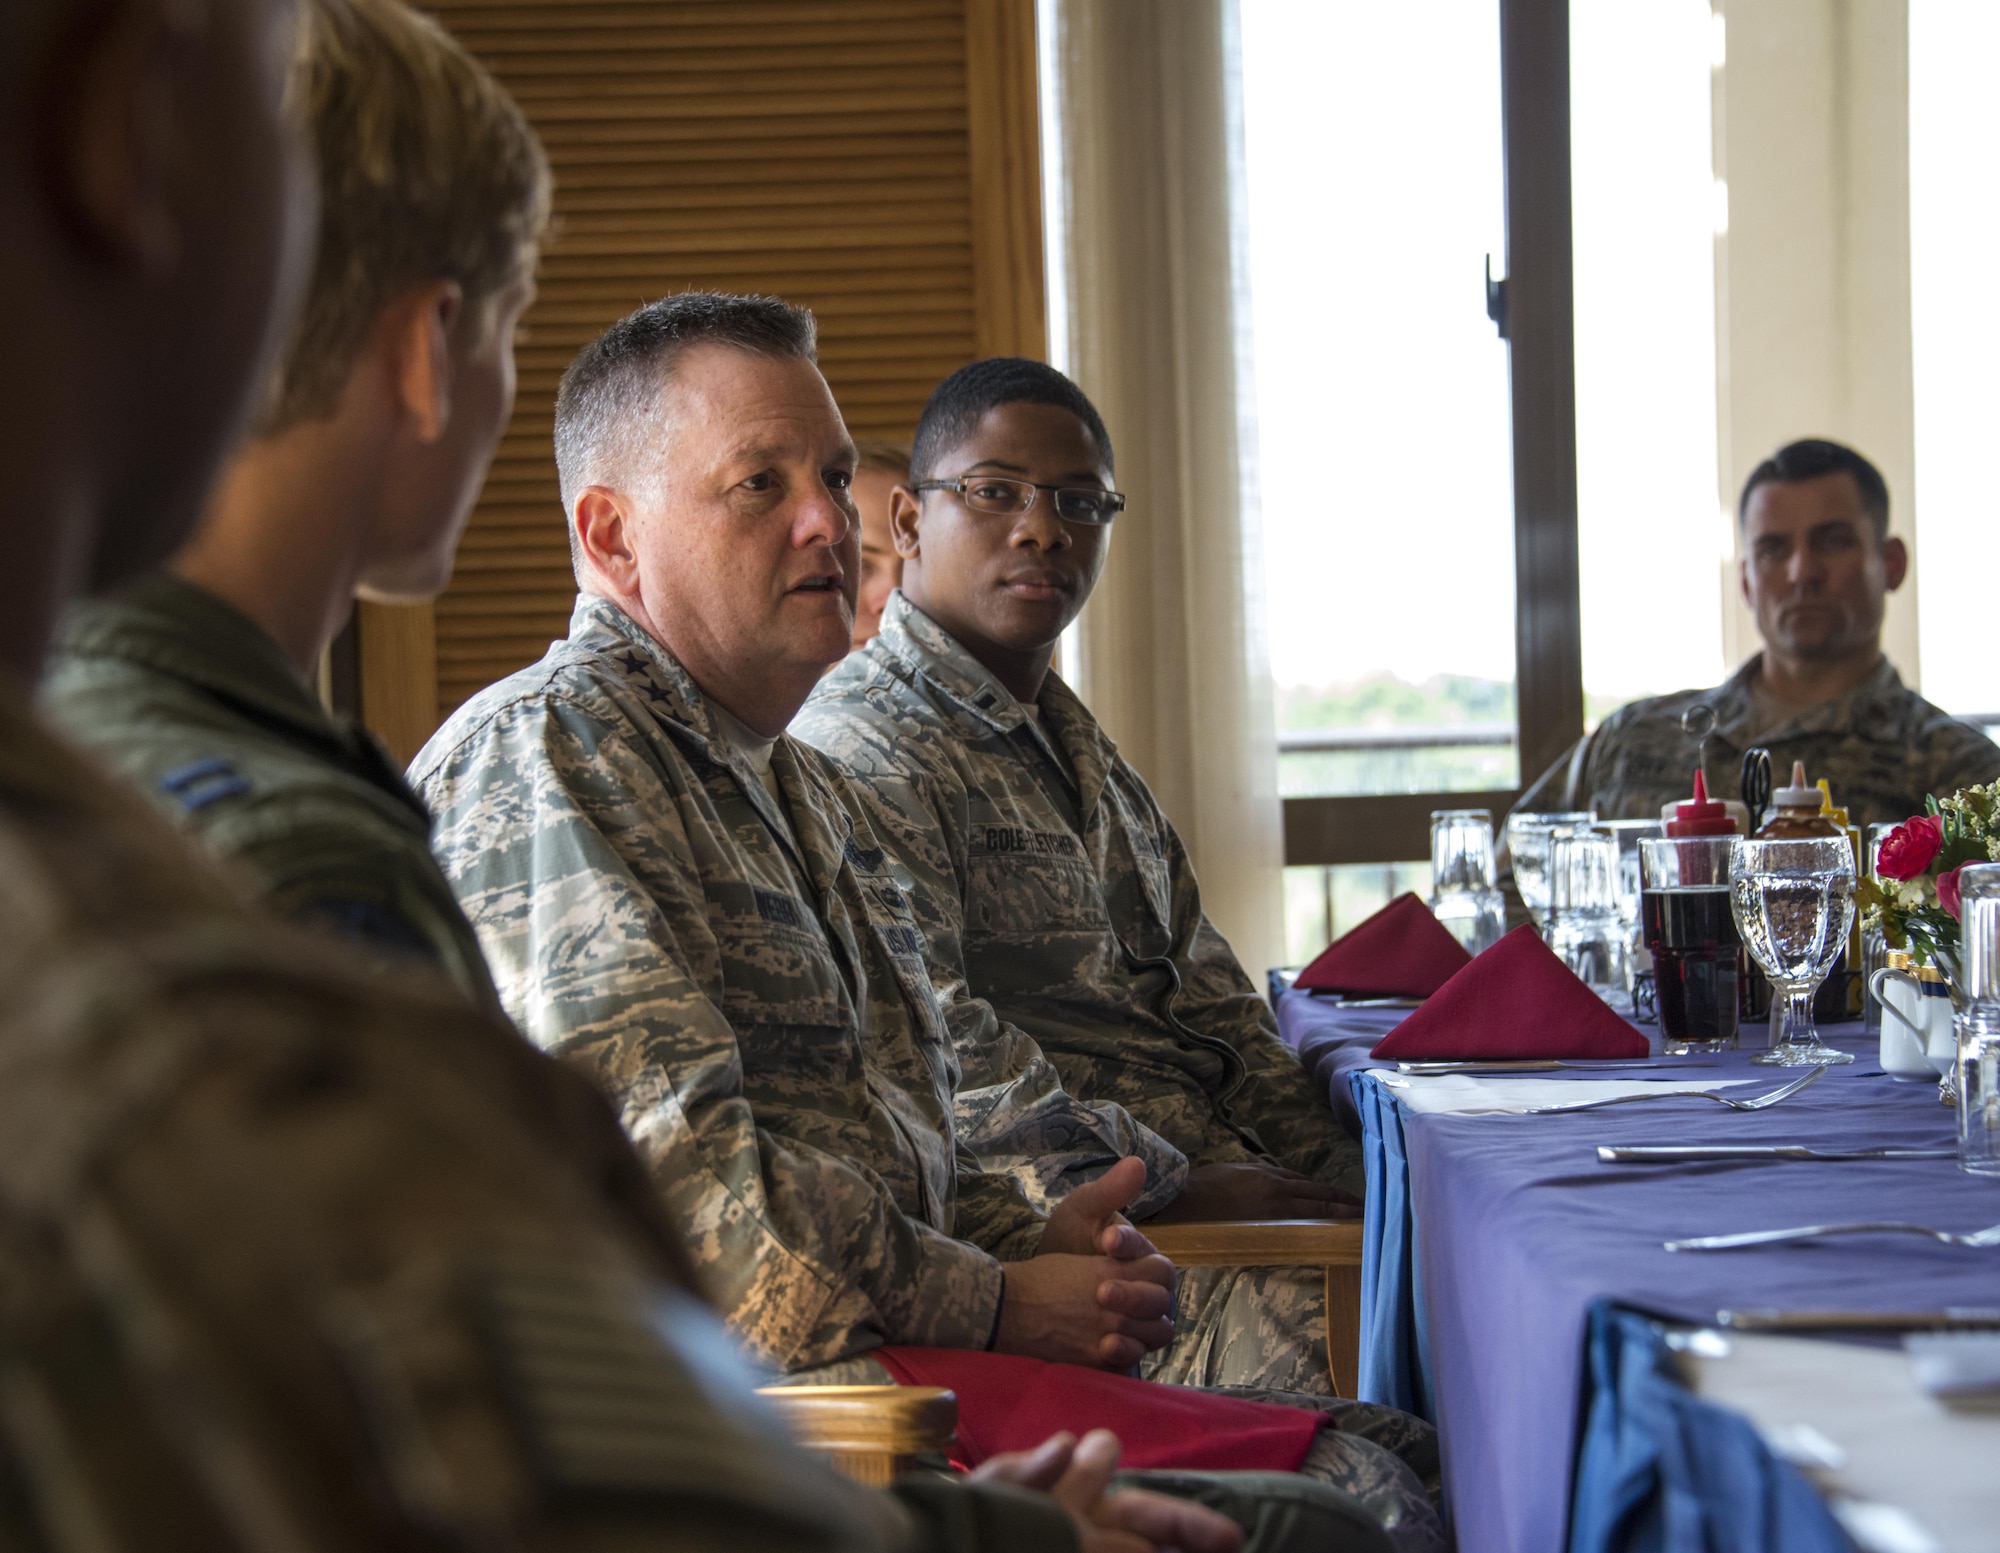 U.S. Air Force Lt. Gen. Brad Webb, commander of Air Force Special Operations Command, sits with members of the 353rd Special Operations Group at an Airman luncheon, Nov. 7, 2016, at Kadena Air Base, Okinawa, Japan. As a part of his first Indo-Asia-Pacific tour since taking command, Webb took the time to meet with the Air Commandos and thank them for their service and sacrifice. (U.S. Air Force photo by Capt. Jessica Tait)